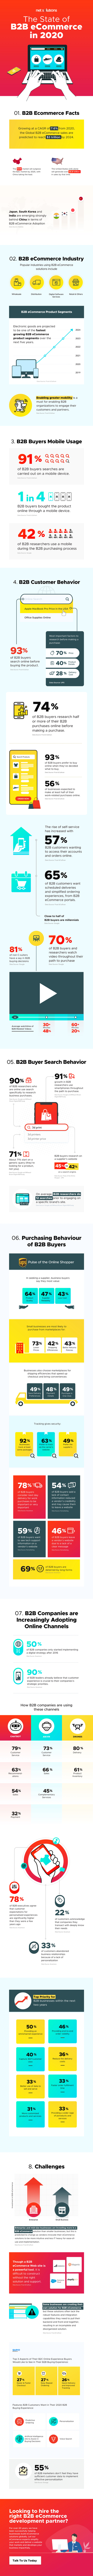 The State of B2B eCommerce in 2020